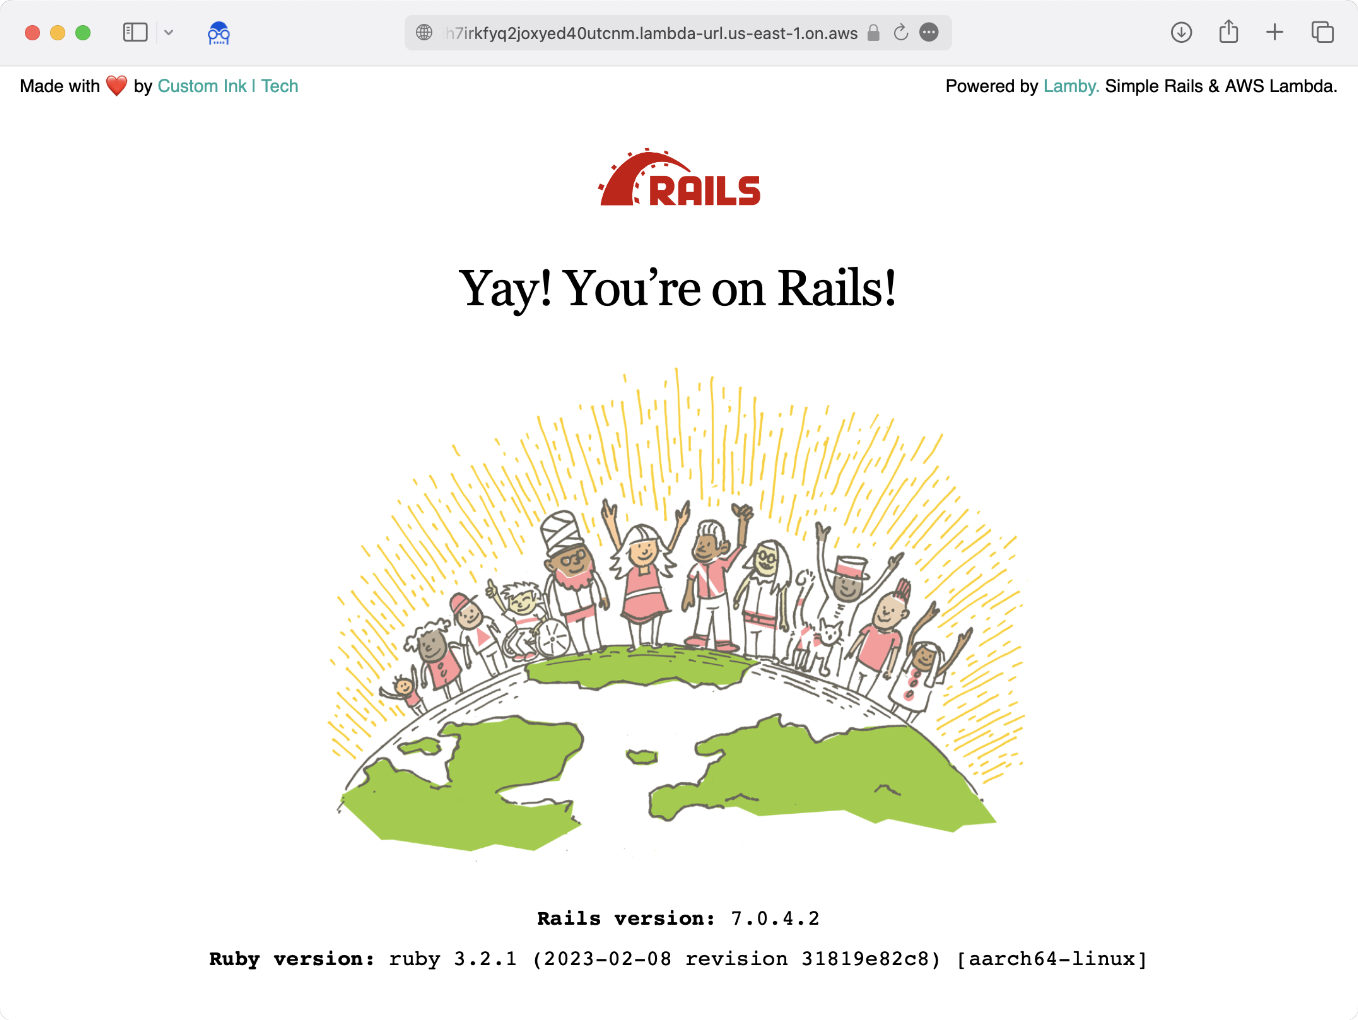 Yay! You're on Rails with AWS Lambda containers